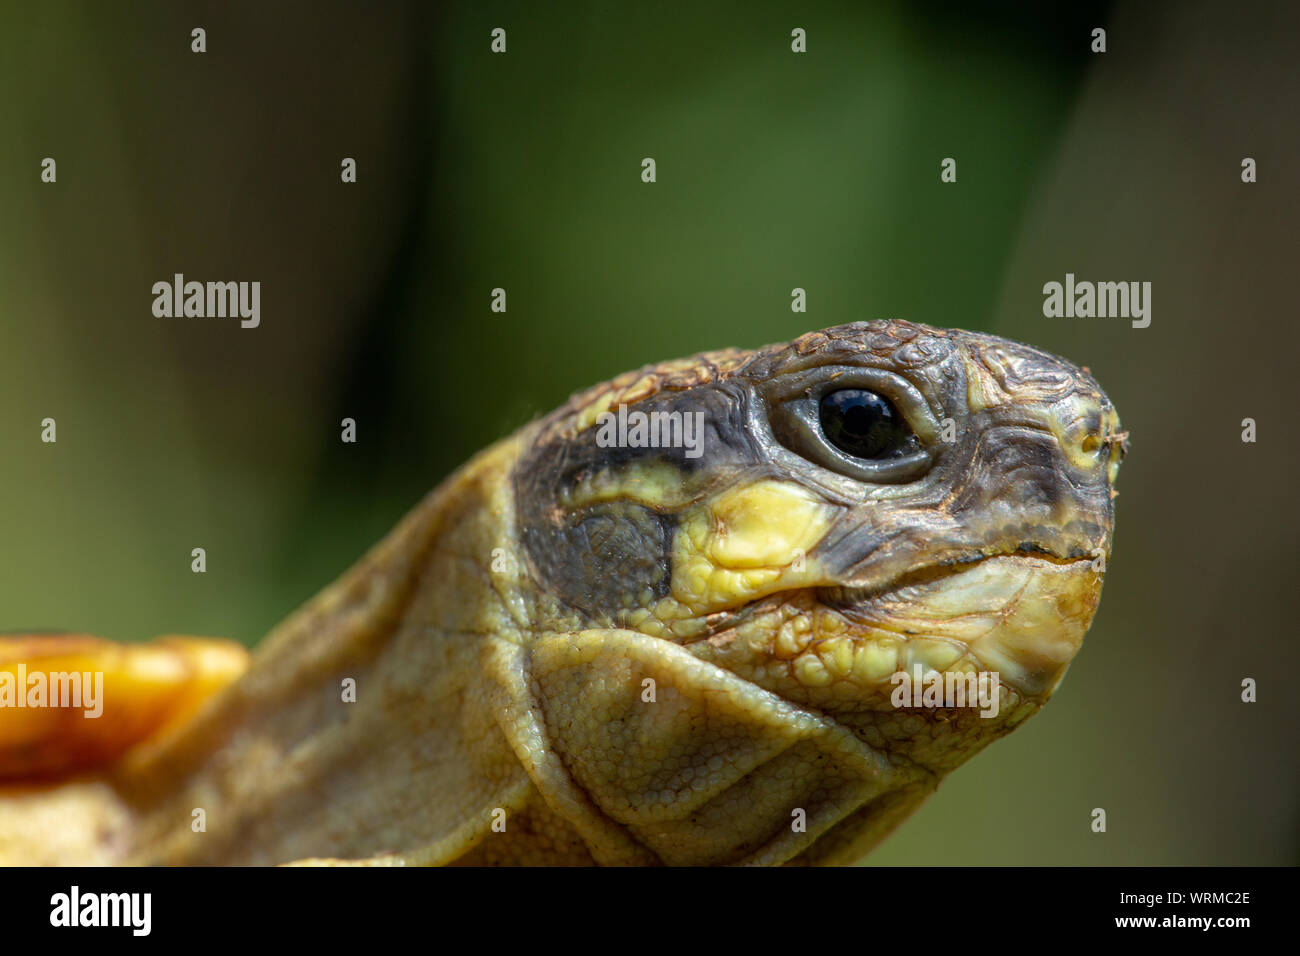 Western Herman’s Tortoise (Testudo hermanni hermanni). Close up of the head showing the yellow cheek patch below the eye, between and alongside the ear or tympanum. Stock Photo